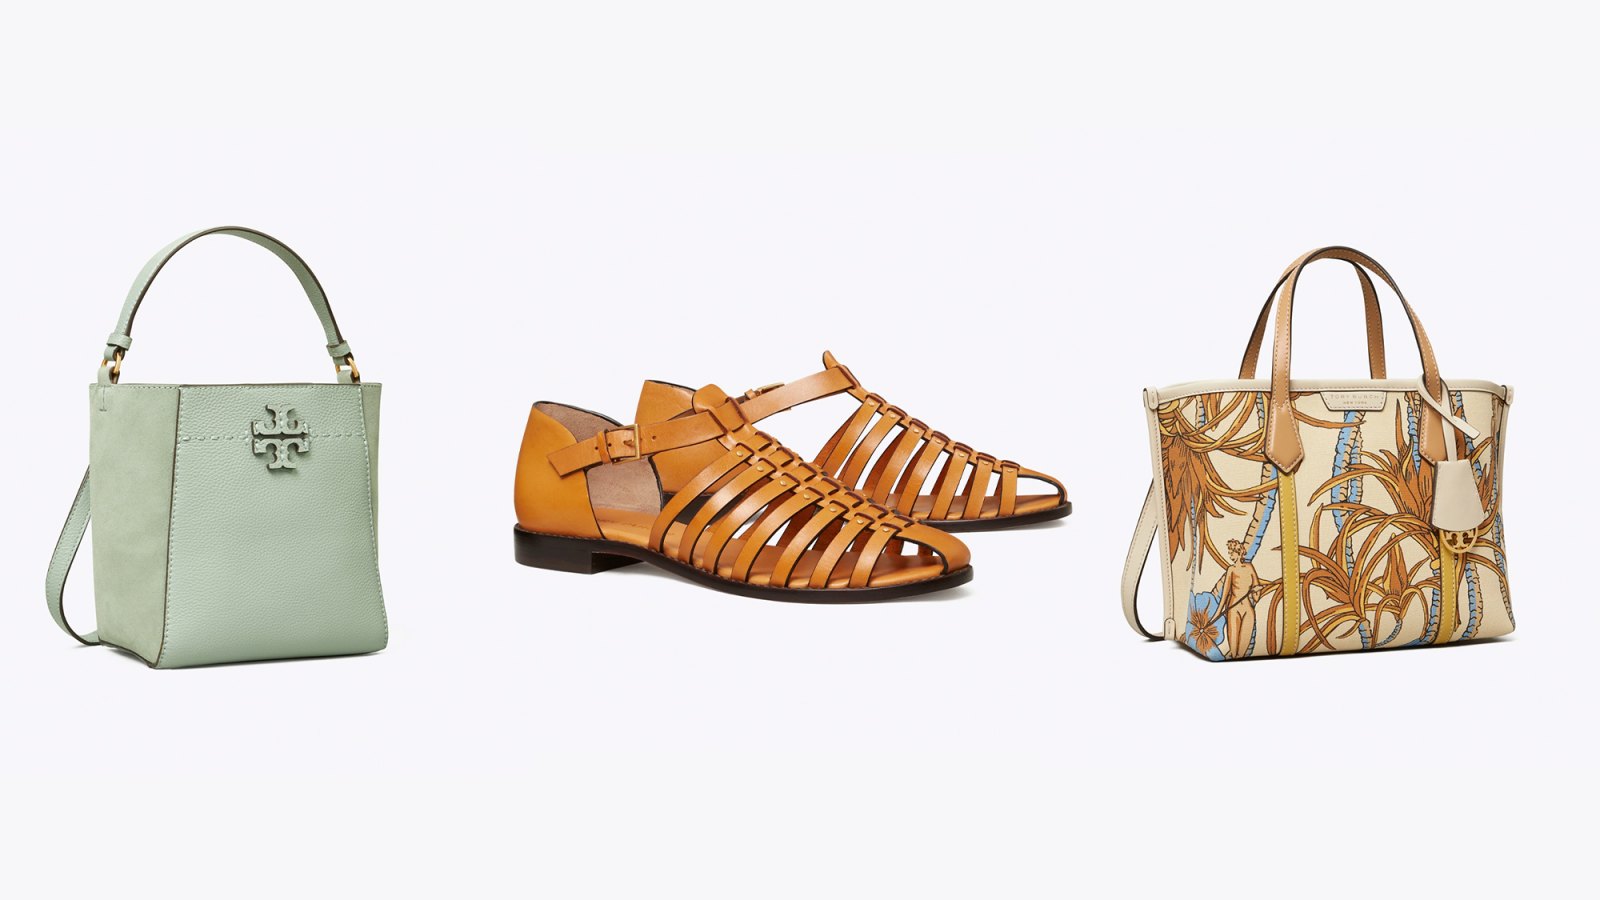 Tory Burch Has Tons of Accessories on Sale for the End of Summer